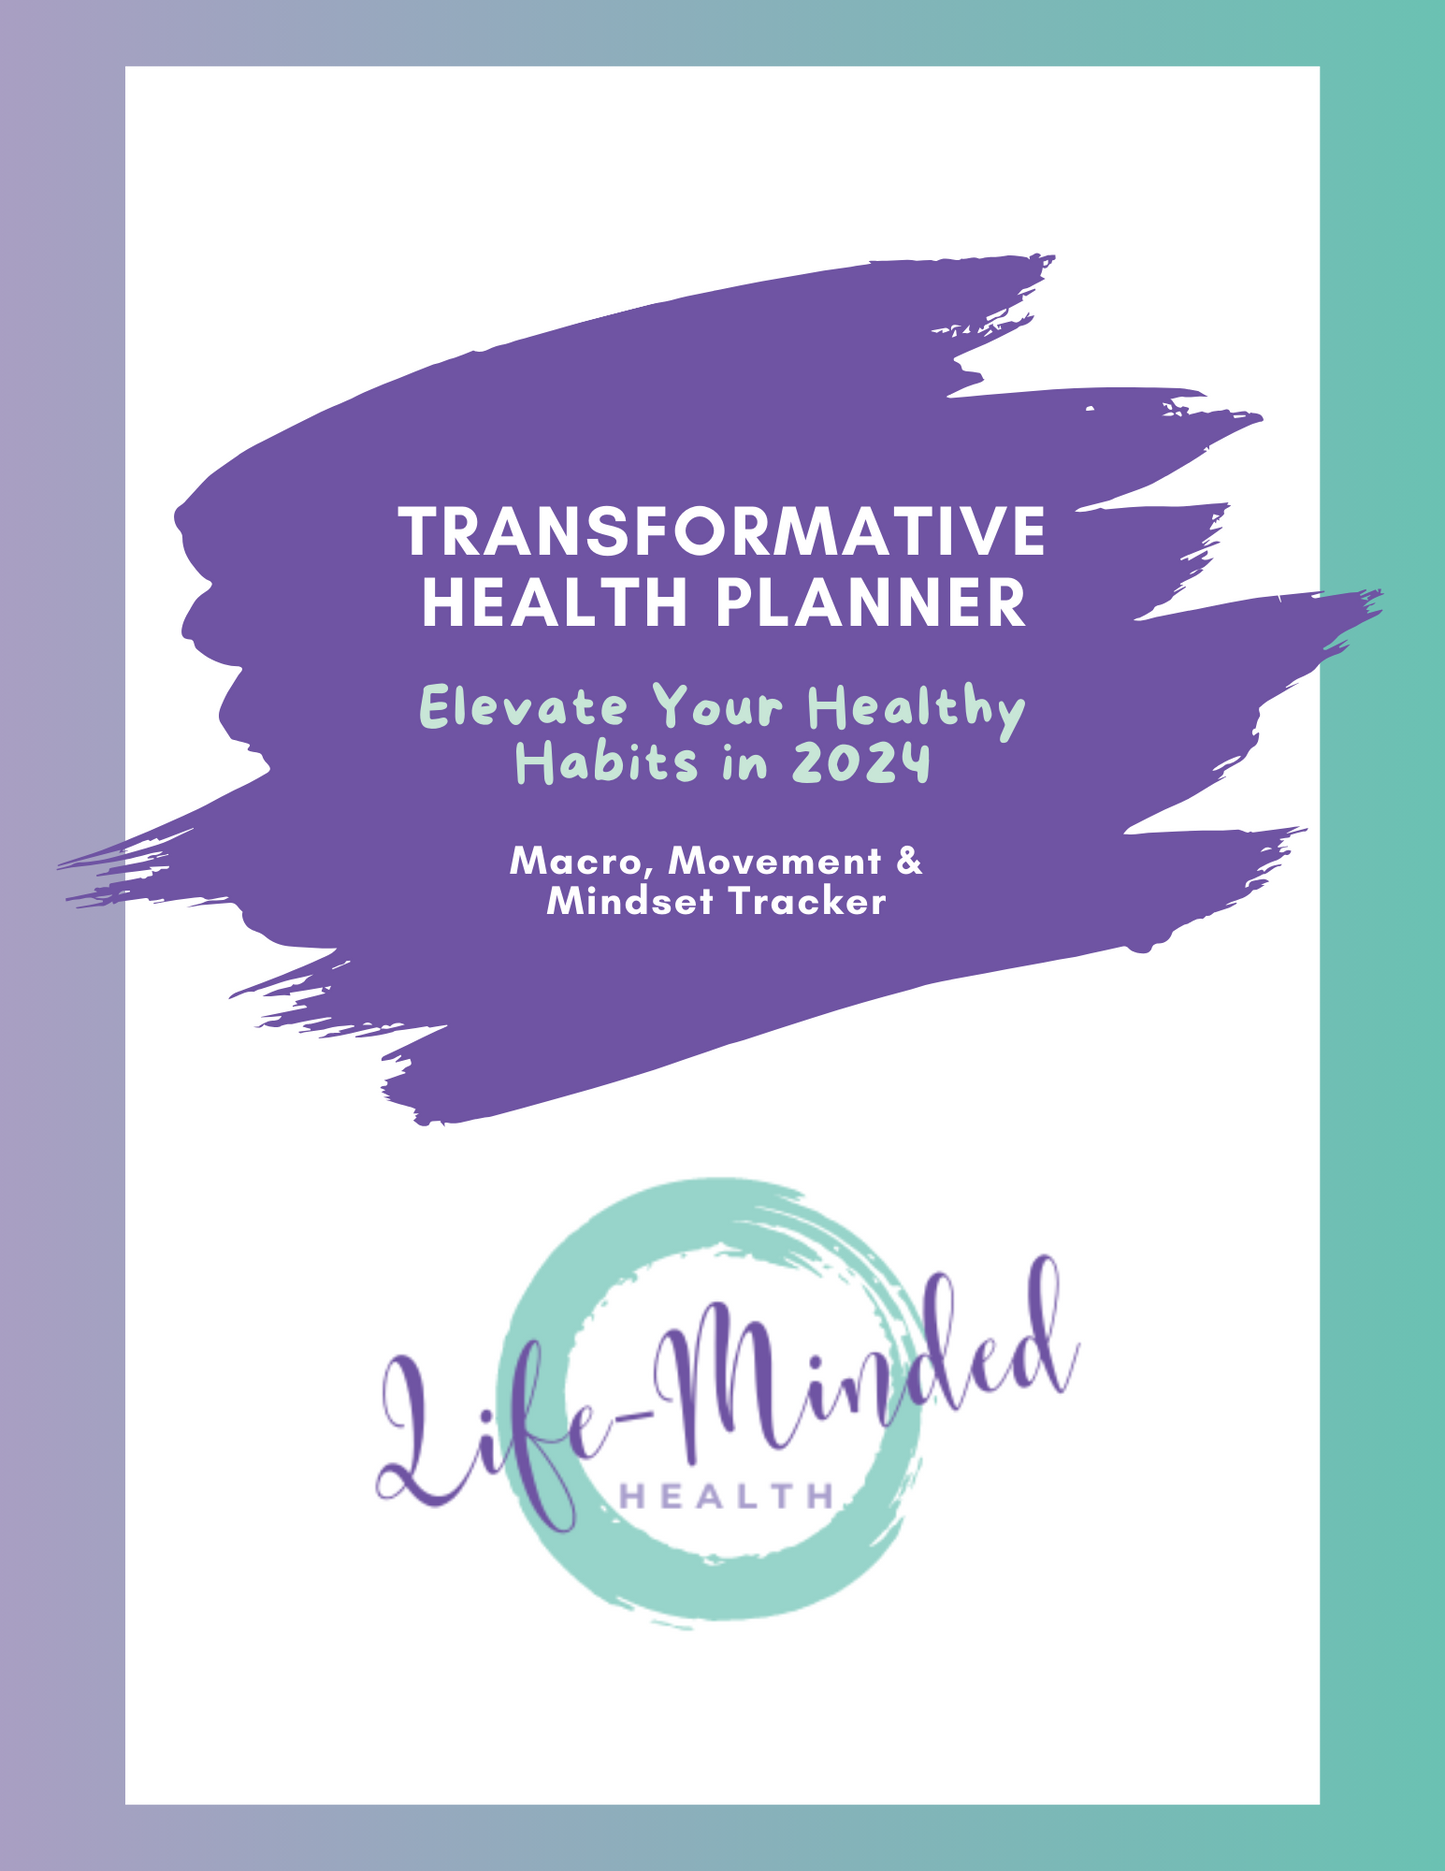 Transformative Health Planner: Elevate Your Healthy Habits in 2024